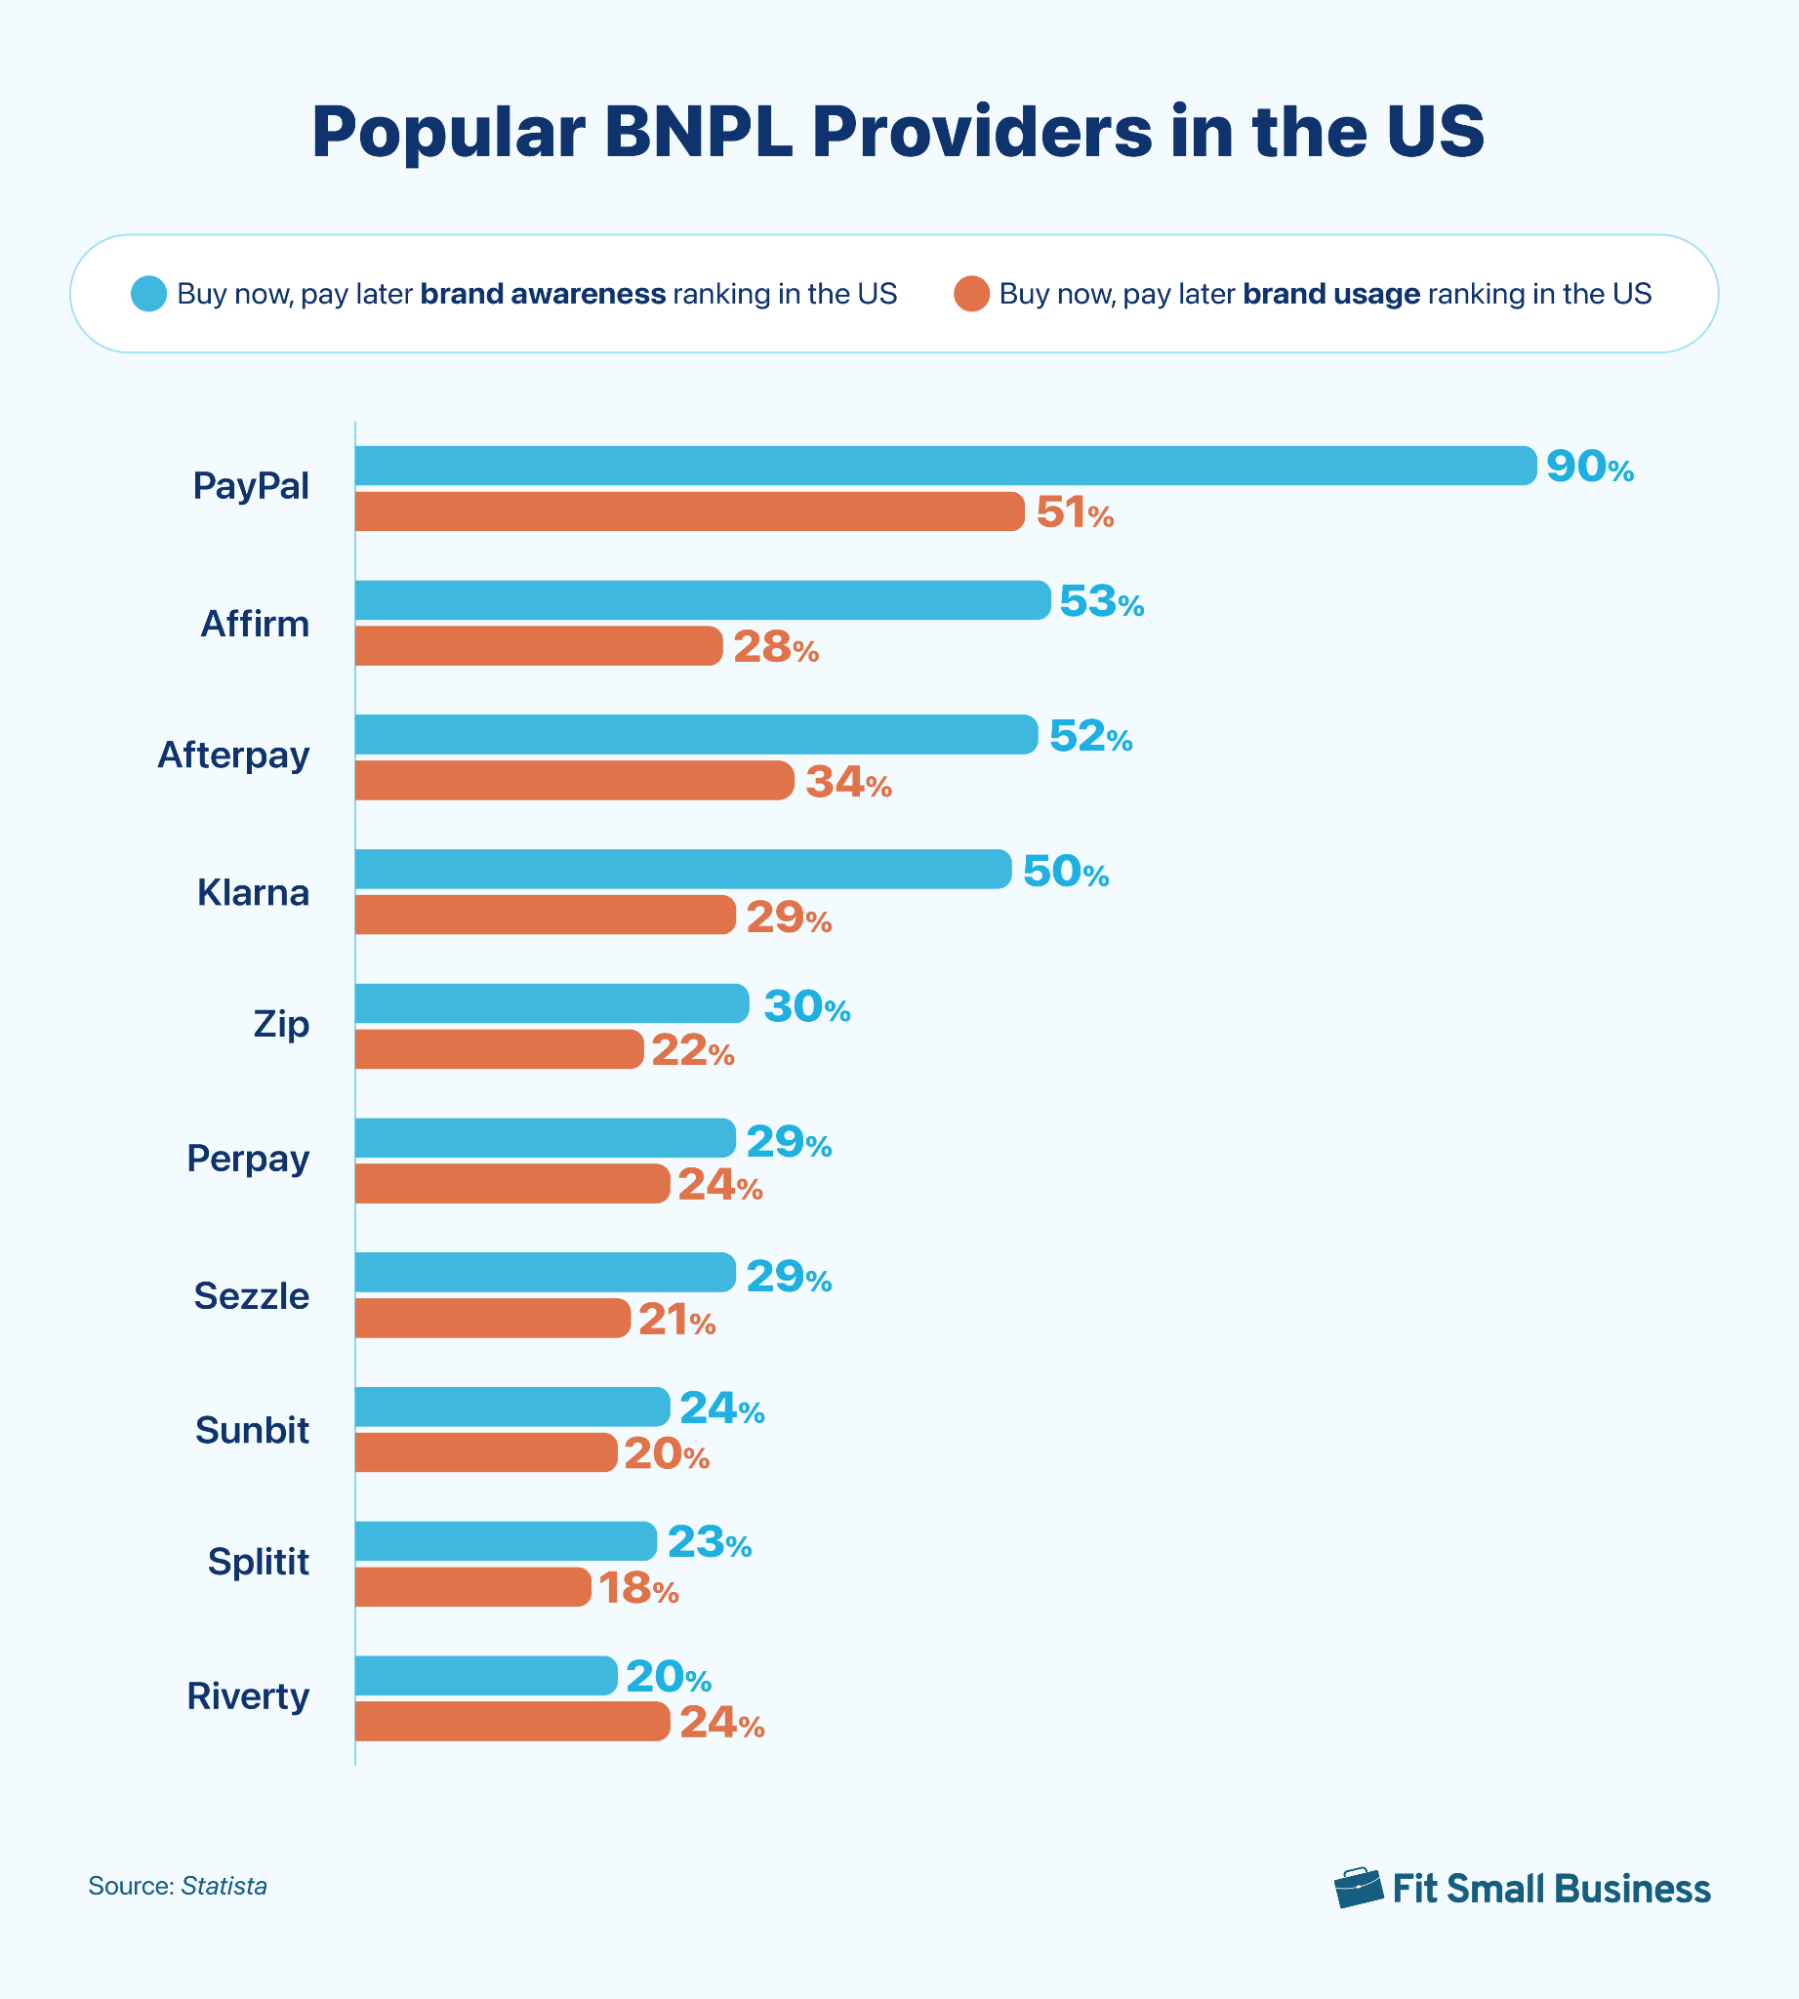  Bar graph of the most popular BNPL apps in the US in terms of usage and brand awareness.